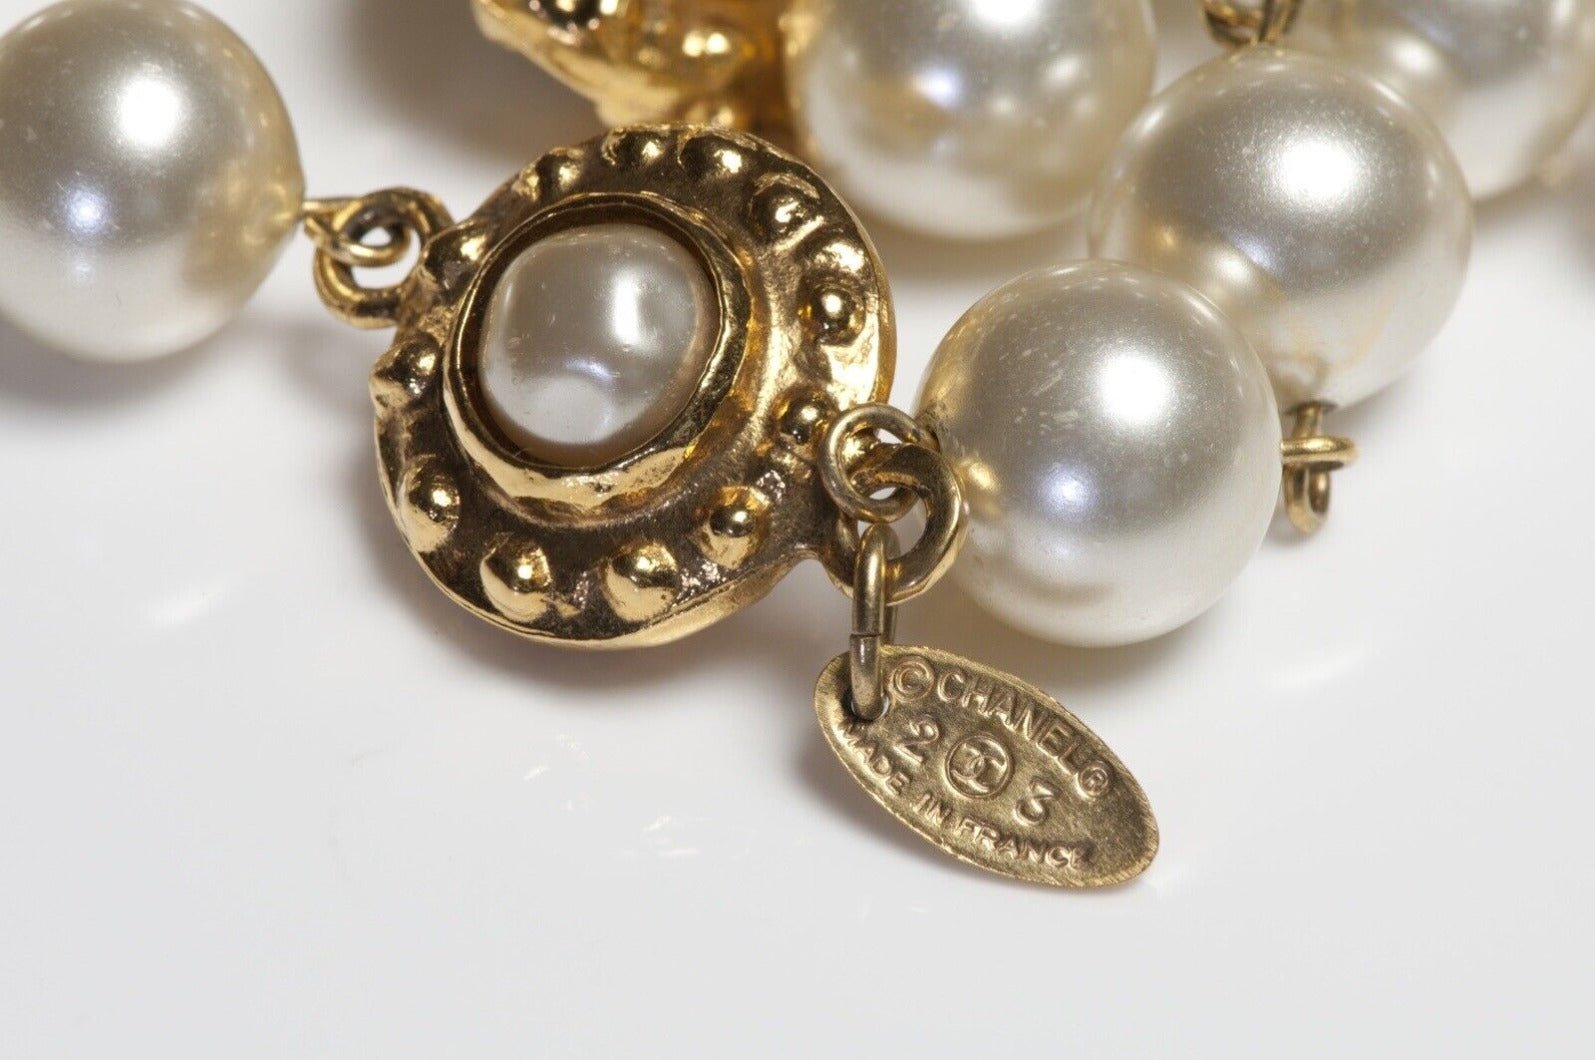 CHANEL Paris 1980’s Byzantine Style Extra Long Pearl Sautoir Necklace